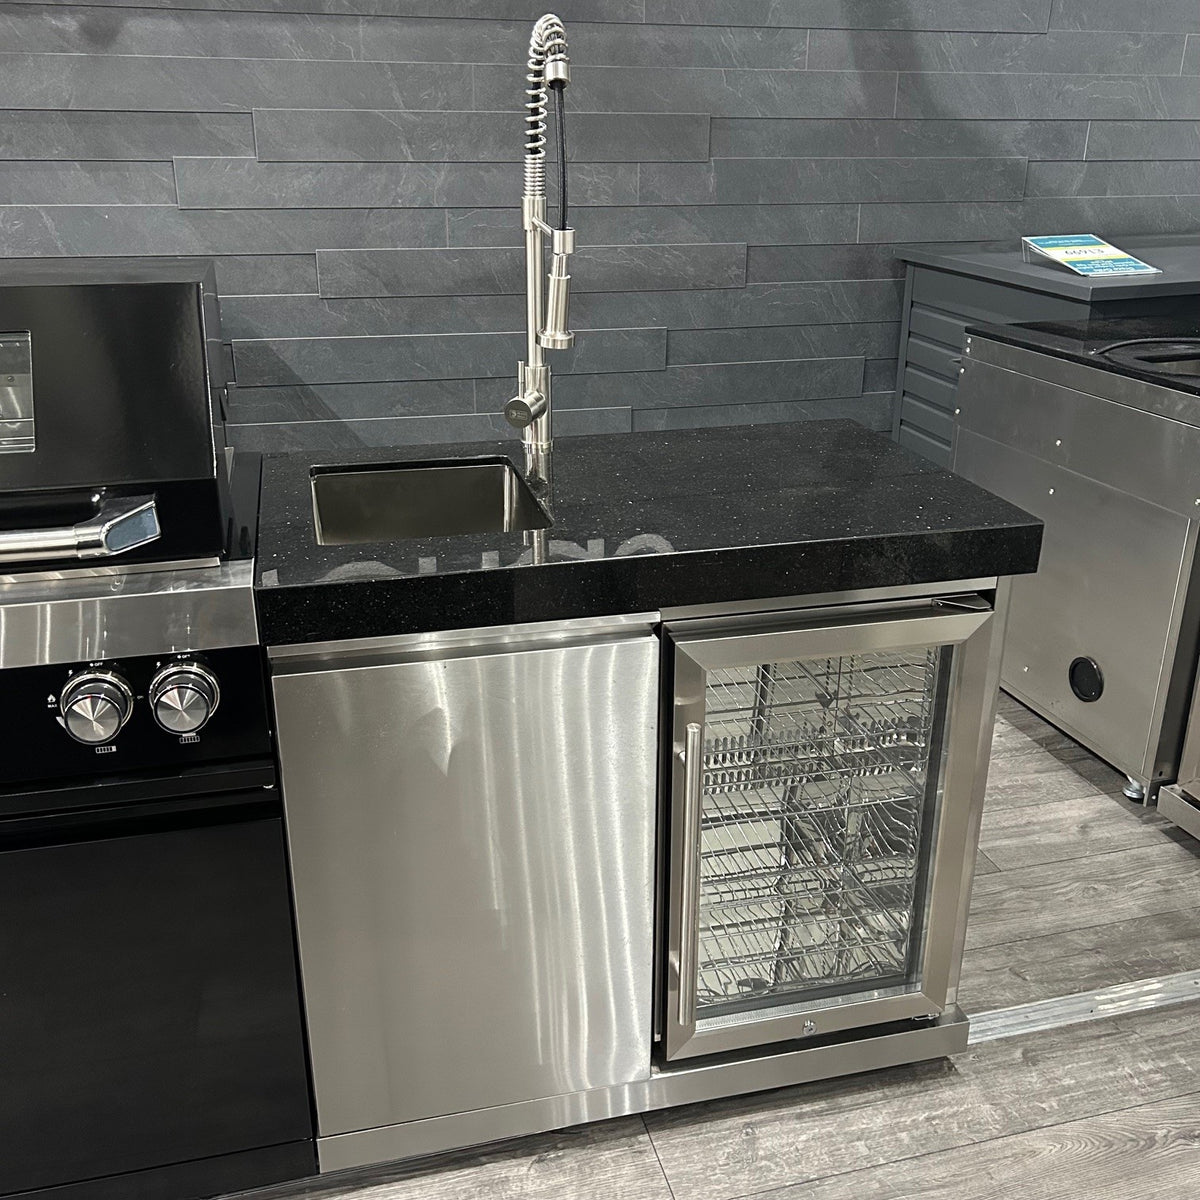 Ex Display Draco Grills 6 Burner BBQ Black Modular Outdoor Kitchen with Stainless Steel Sear Station, Sink and Fridge Unit and Twin Drawer Unit